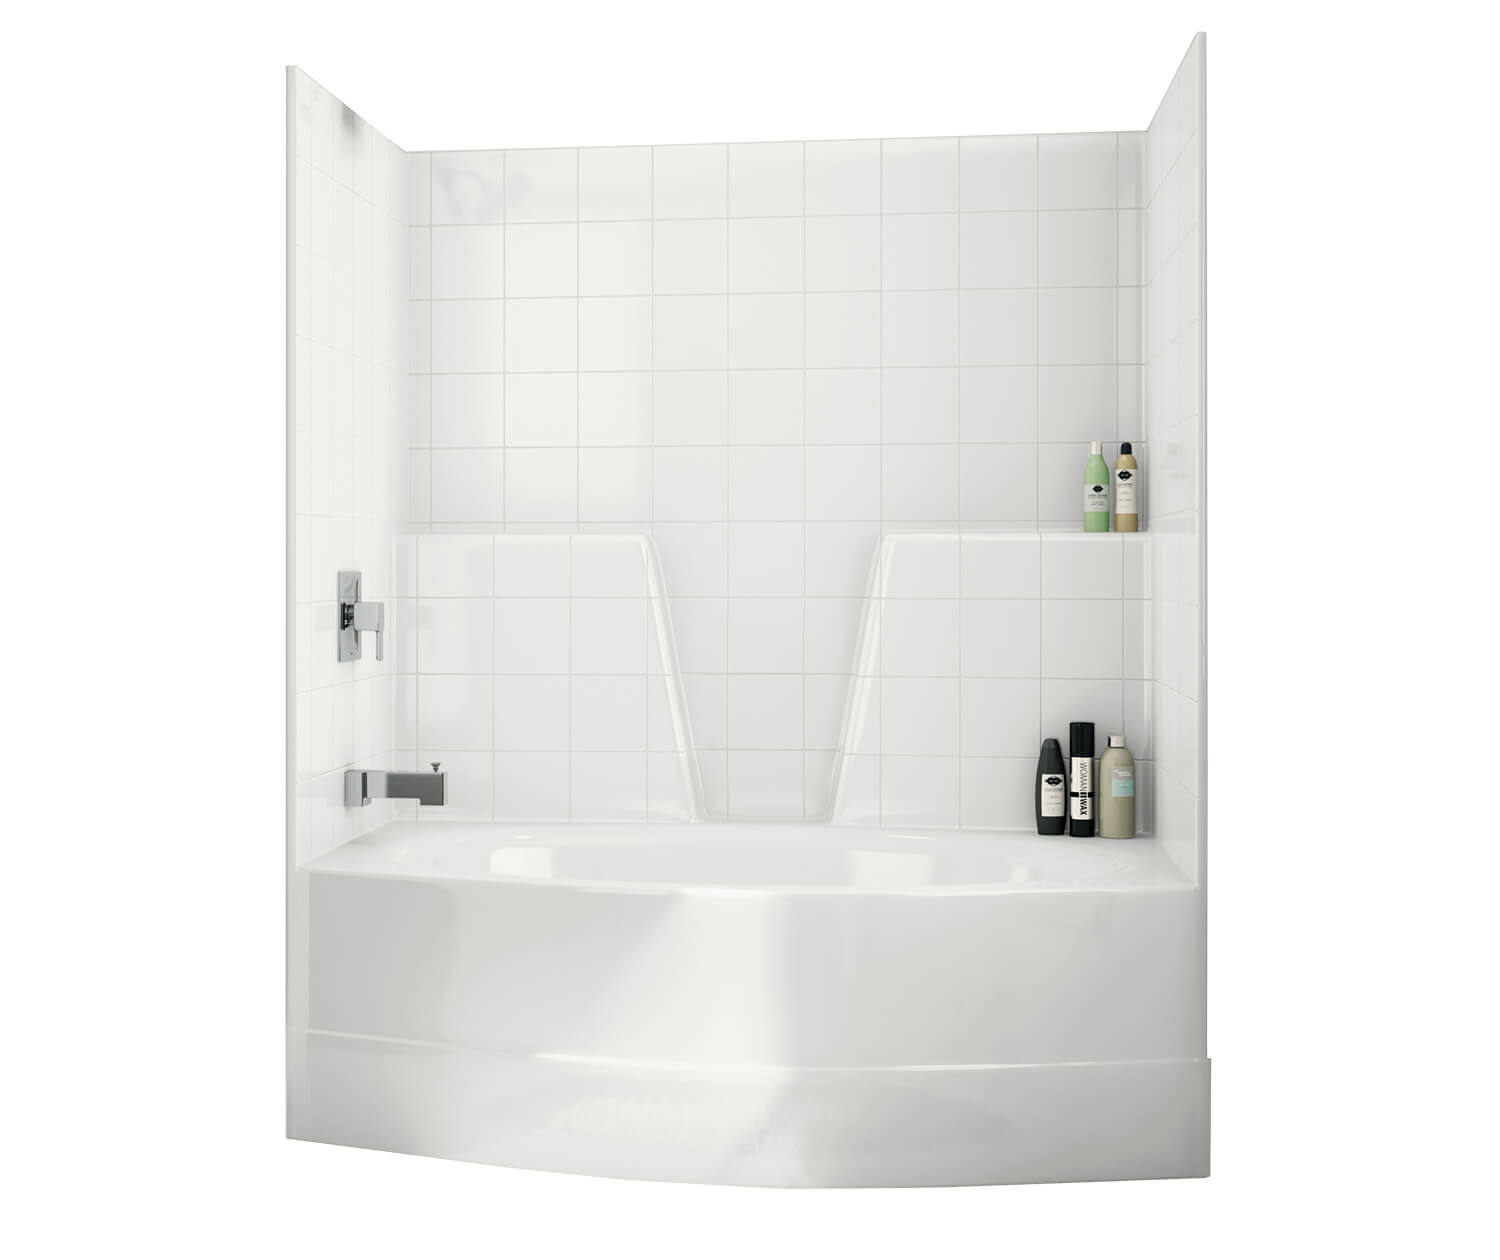 TSOT6042 AcrylX Alcove Right-Hand Drain One-Piece Tub Shower in 